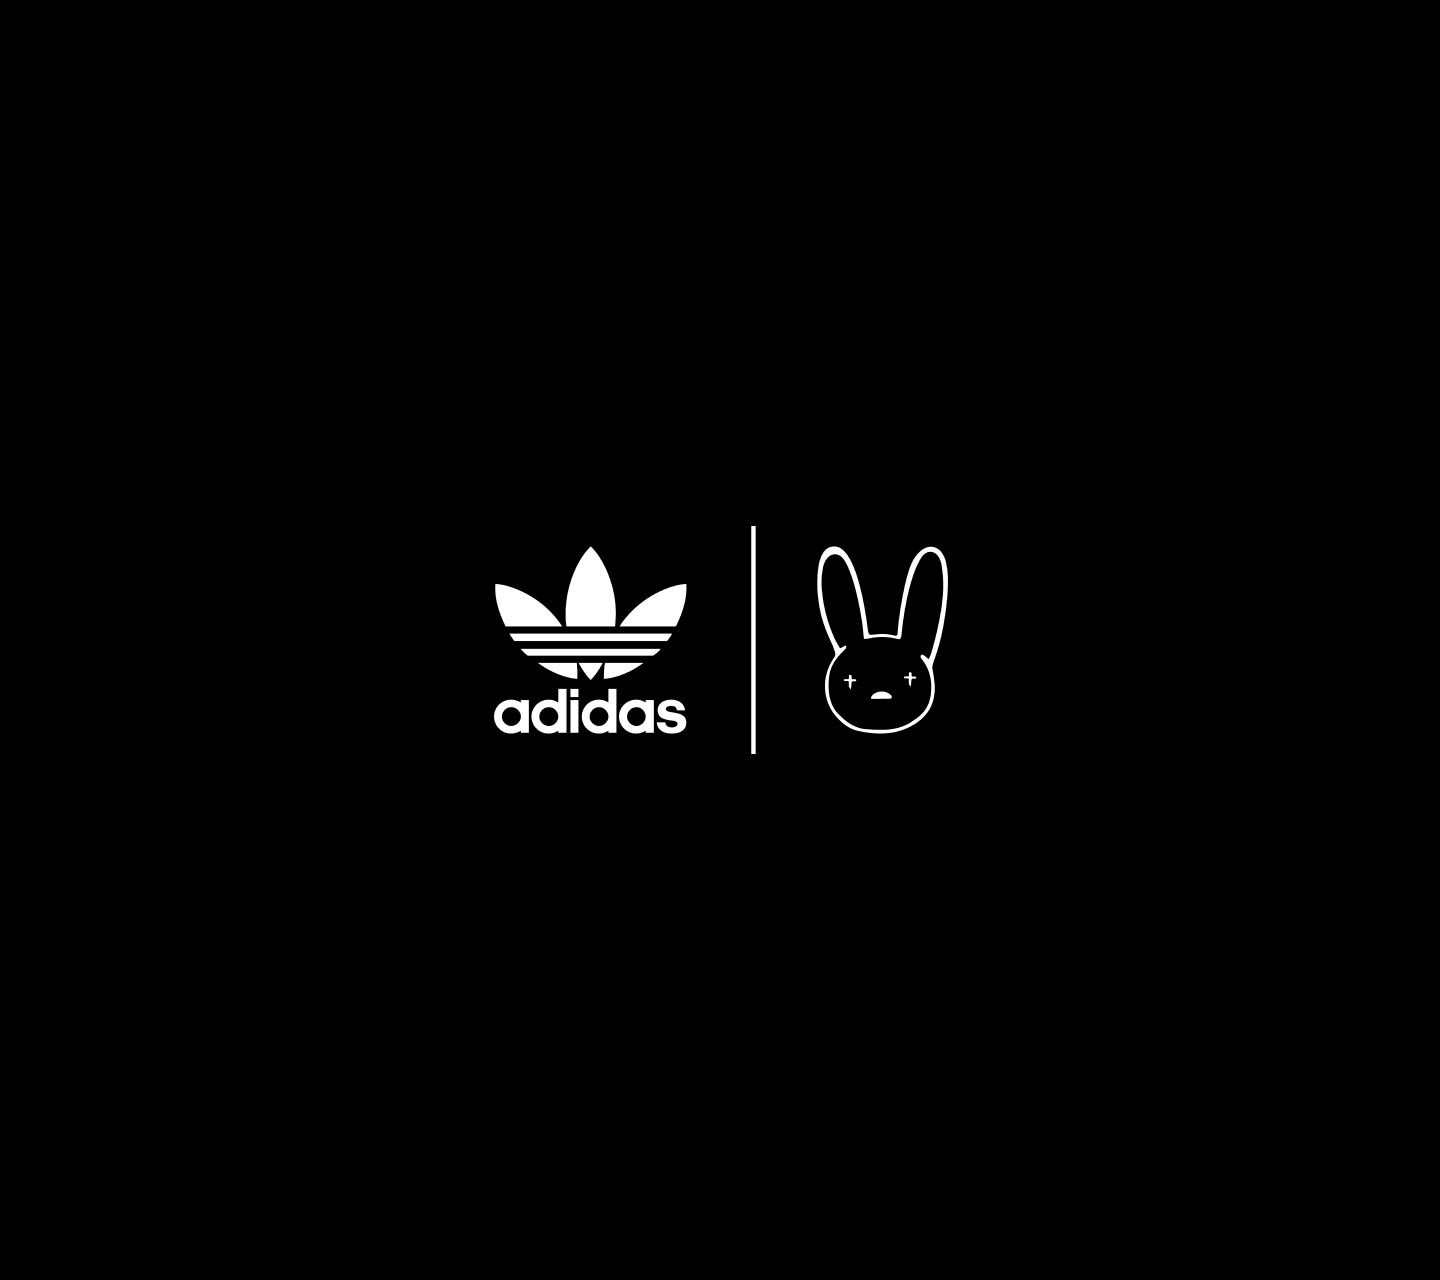 adidas and Bad Bunny logo on a black background.